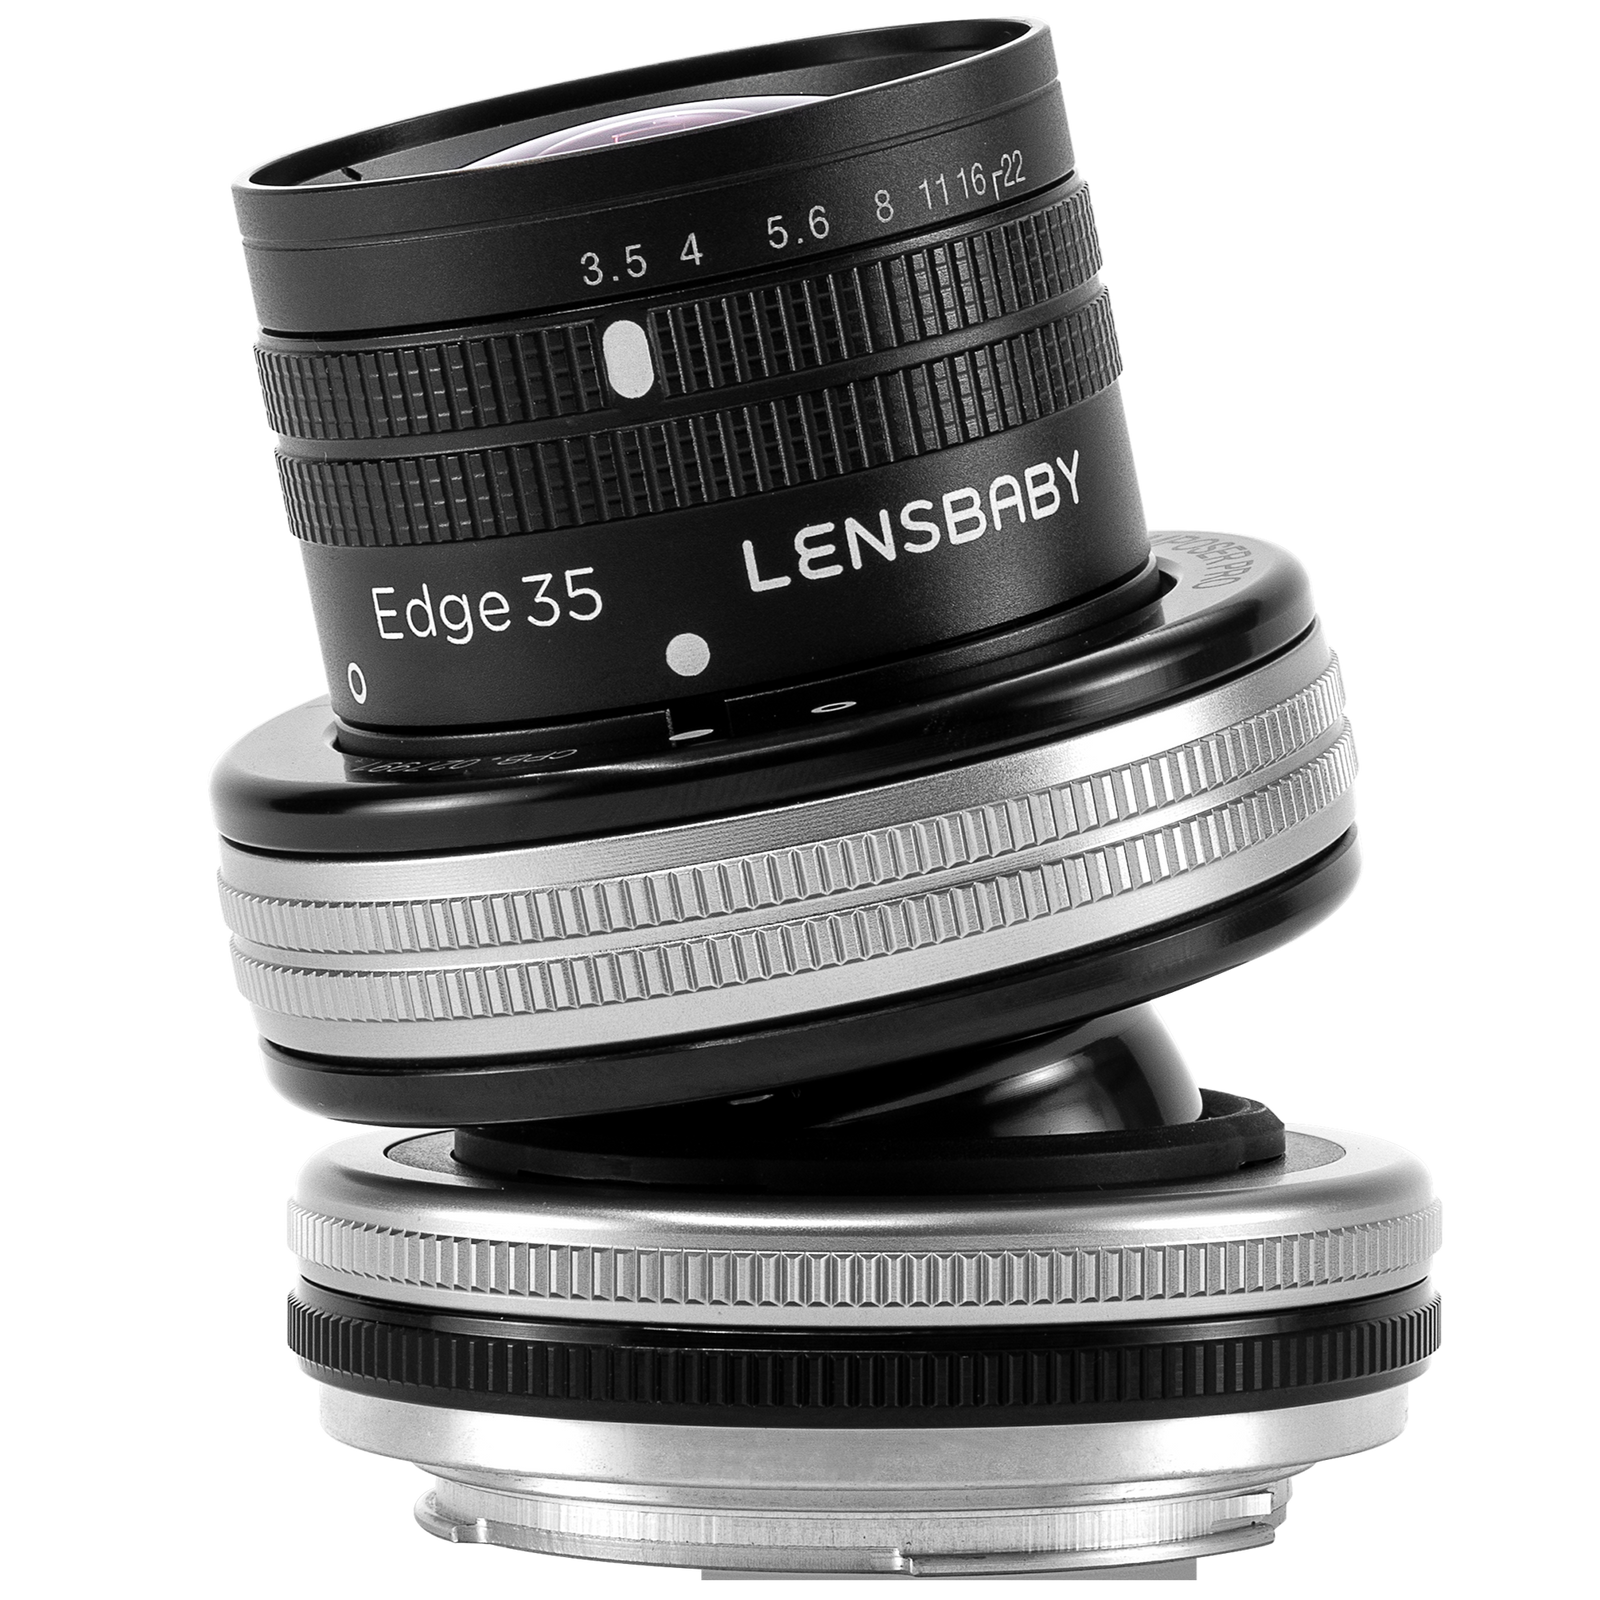 Products - Lensbaby